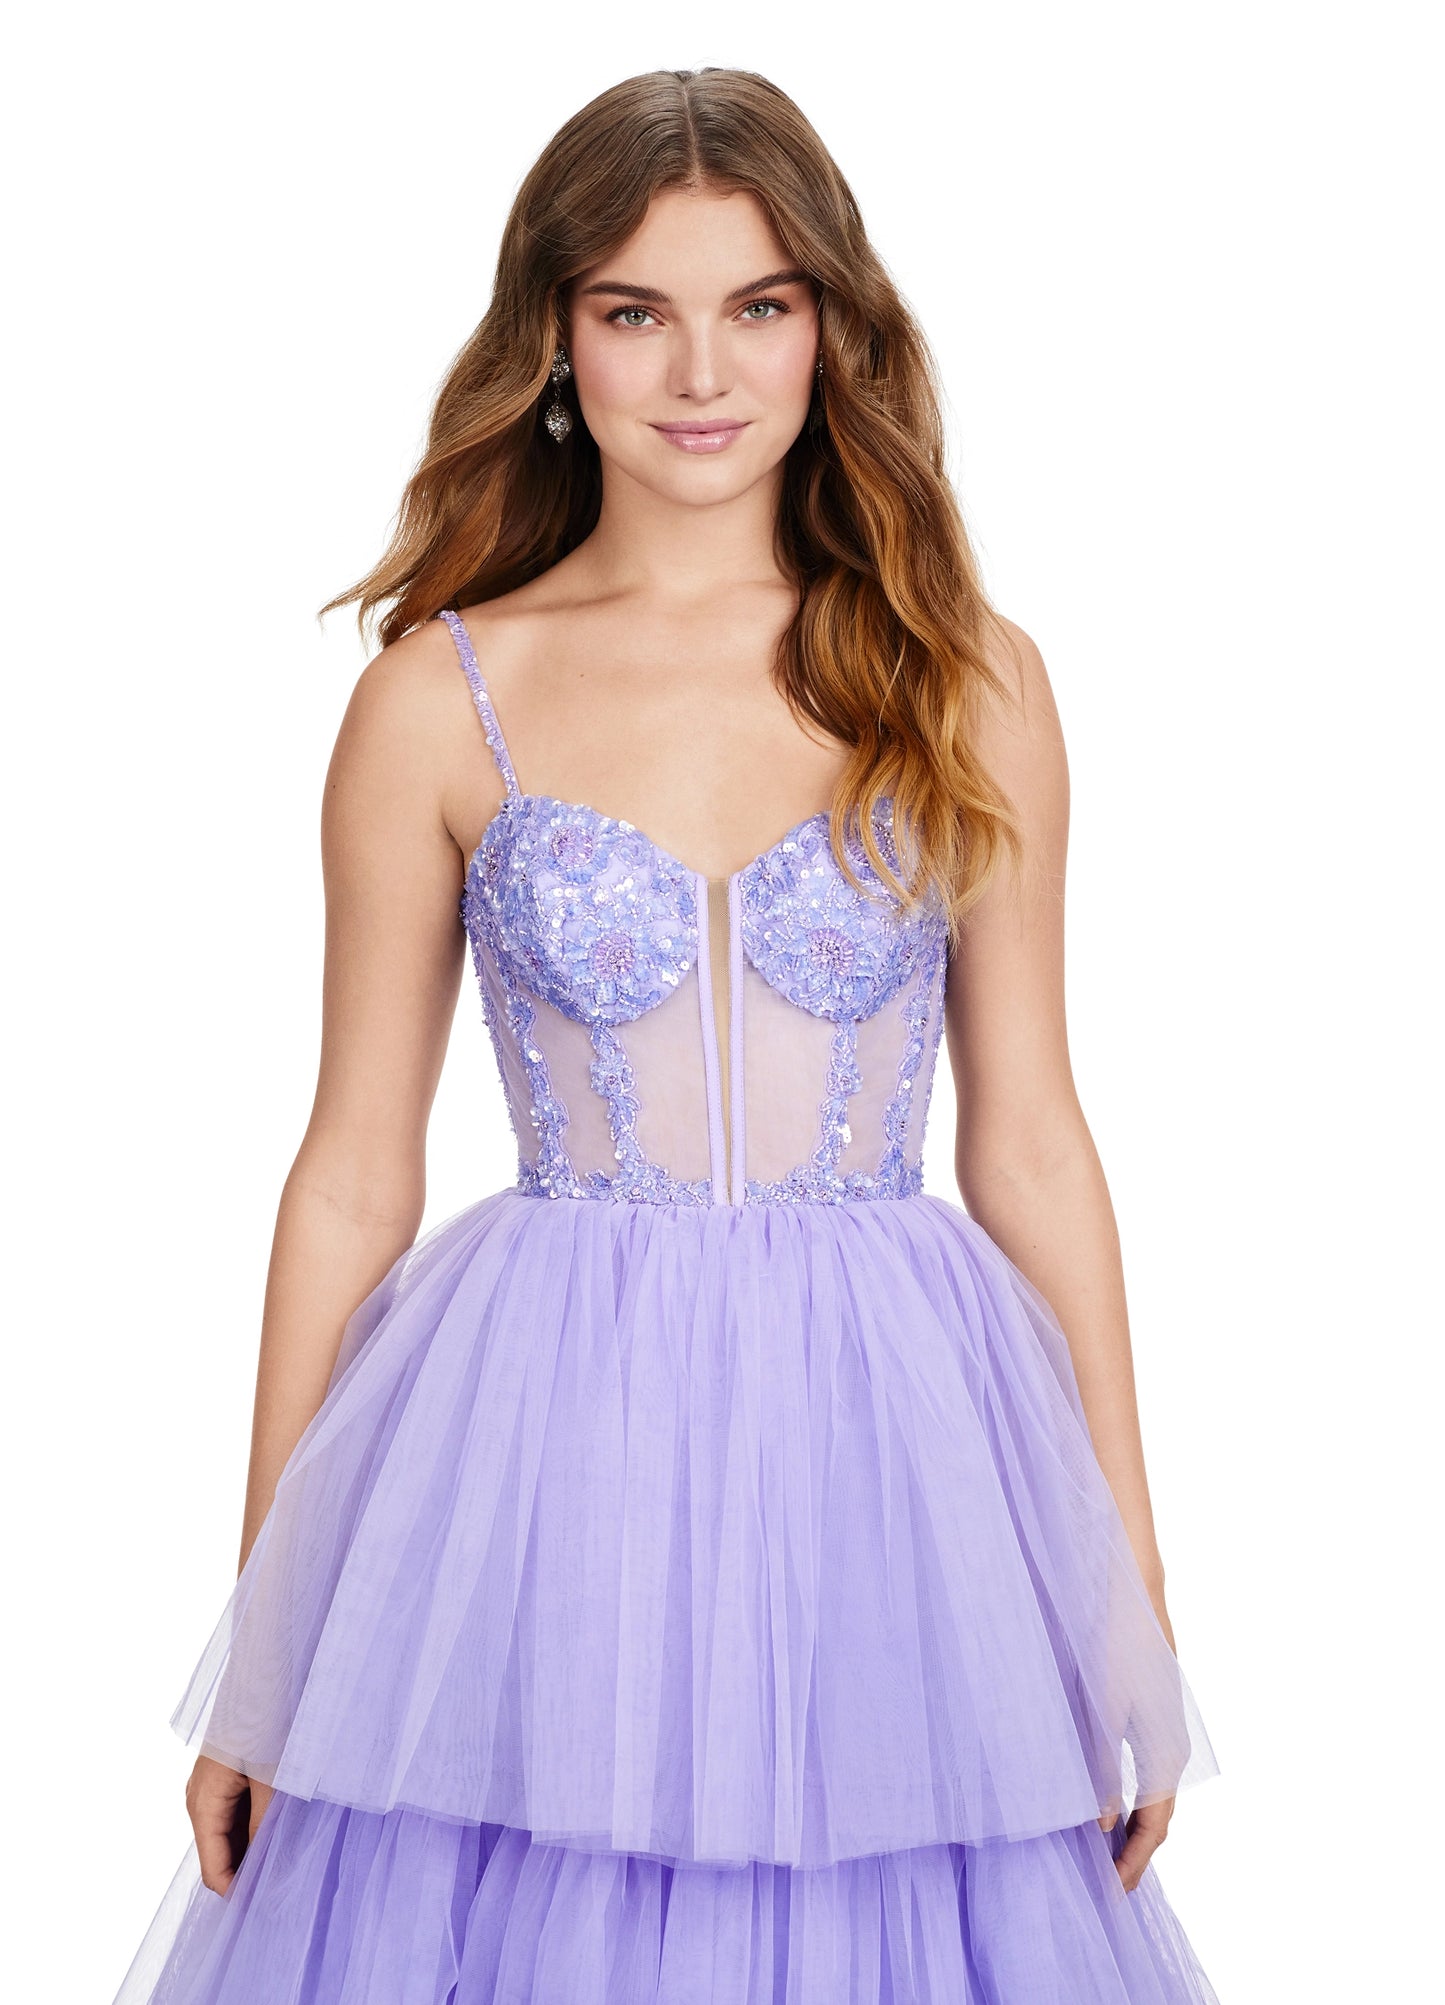 The Ashley Lauren 11462 Sheer Beaded Corset Layer Tulle Prom Dress Ballgown Pageant Tiered Gown is a statement-making piece. Crafted from sheer corset layers, delicate beadwork, and tiered tulle, it's perfect for any special occasion. Elegant and eye-catching, this dress features the perfect balance of comfort and sophistication.